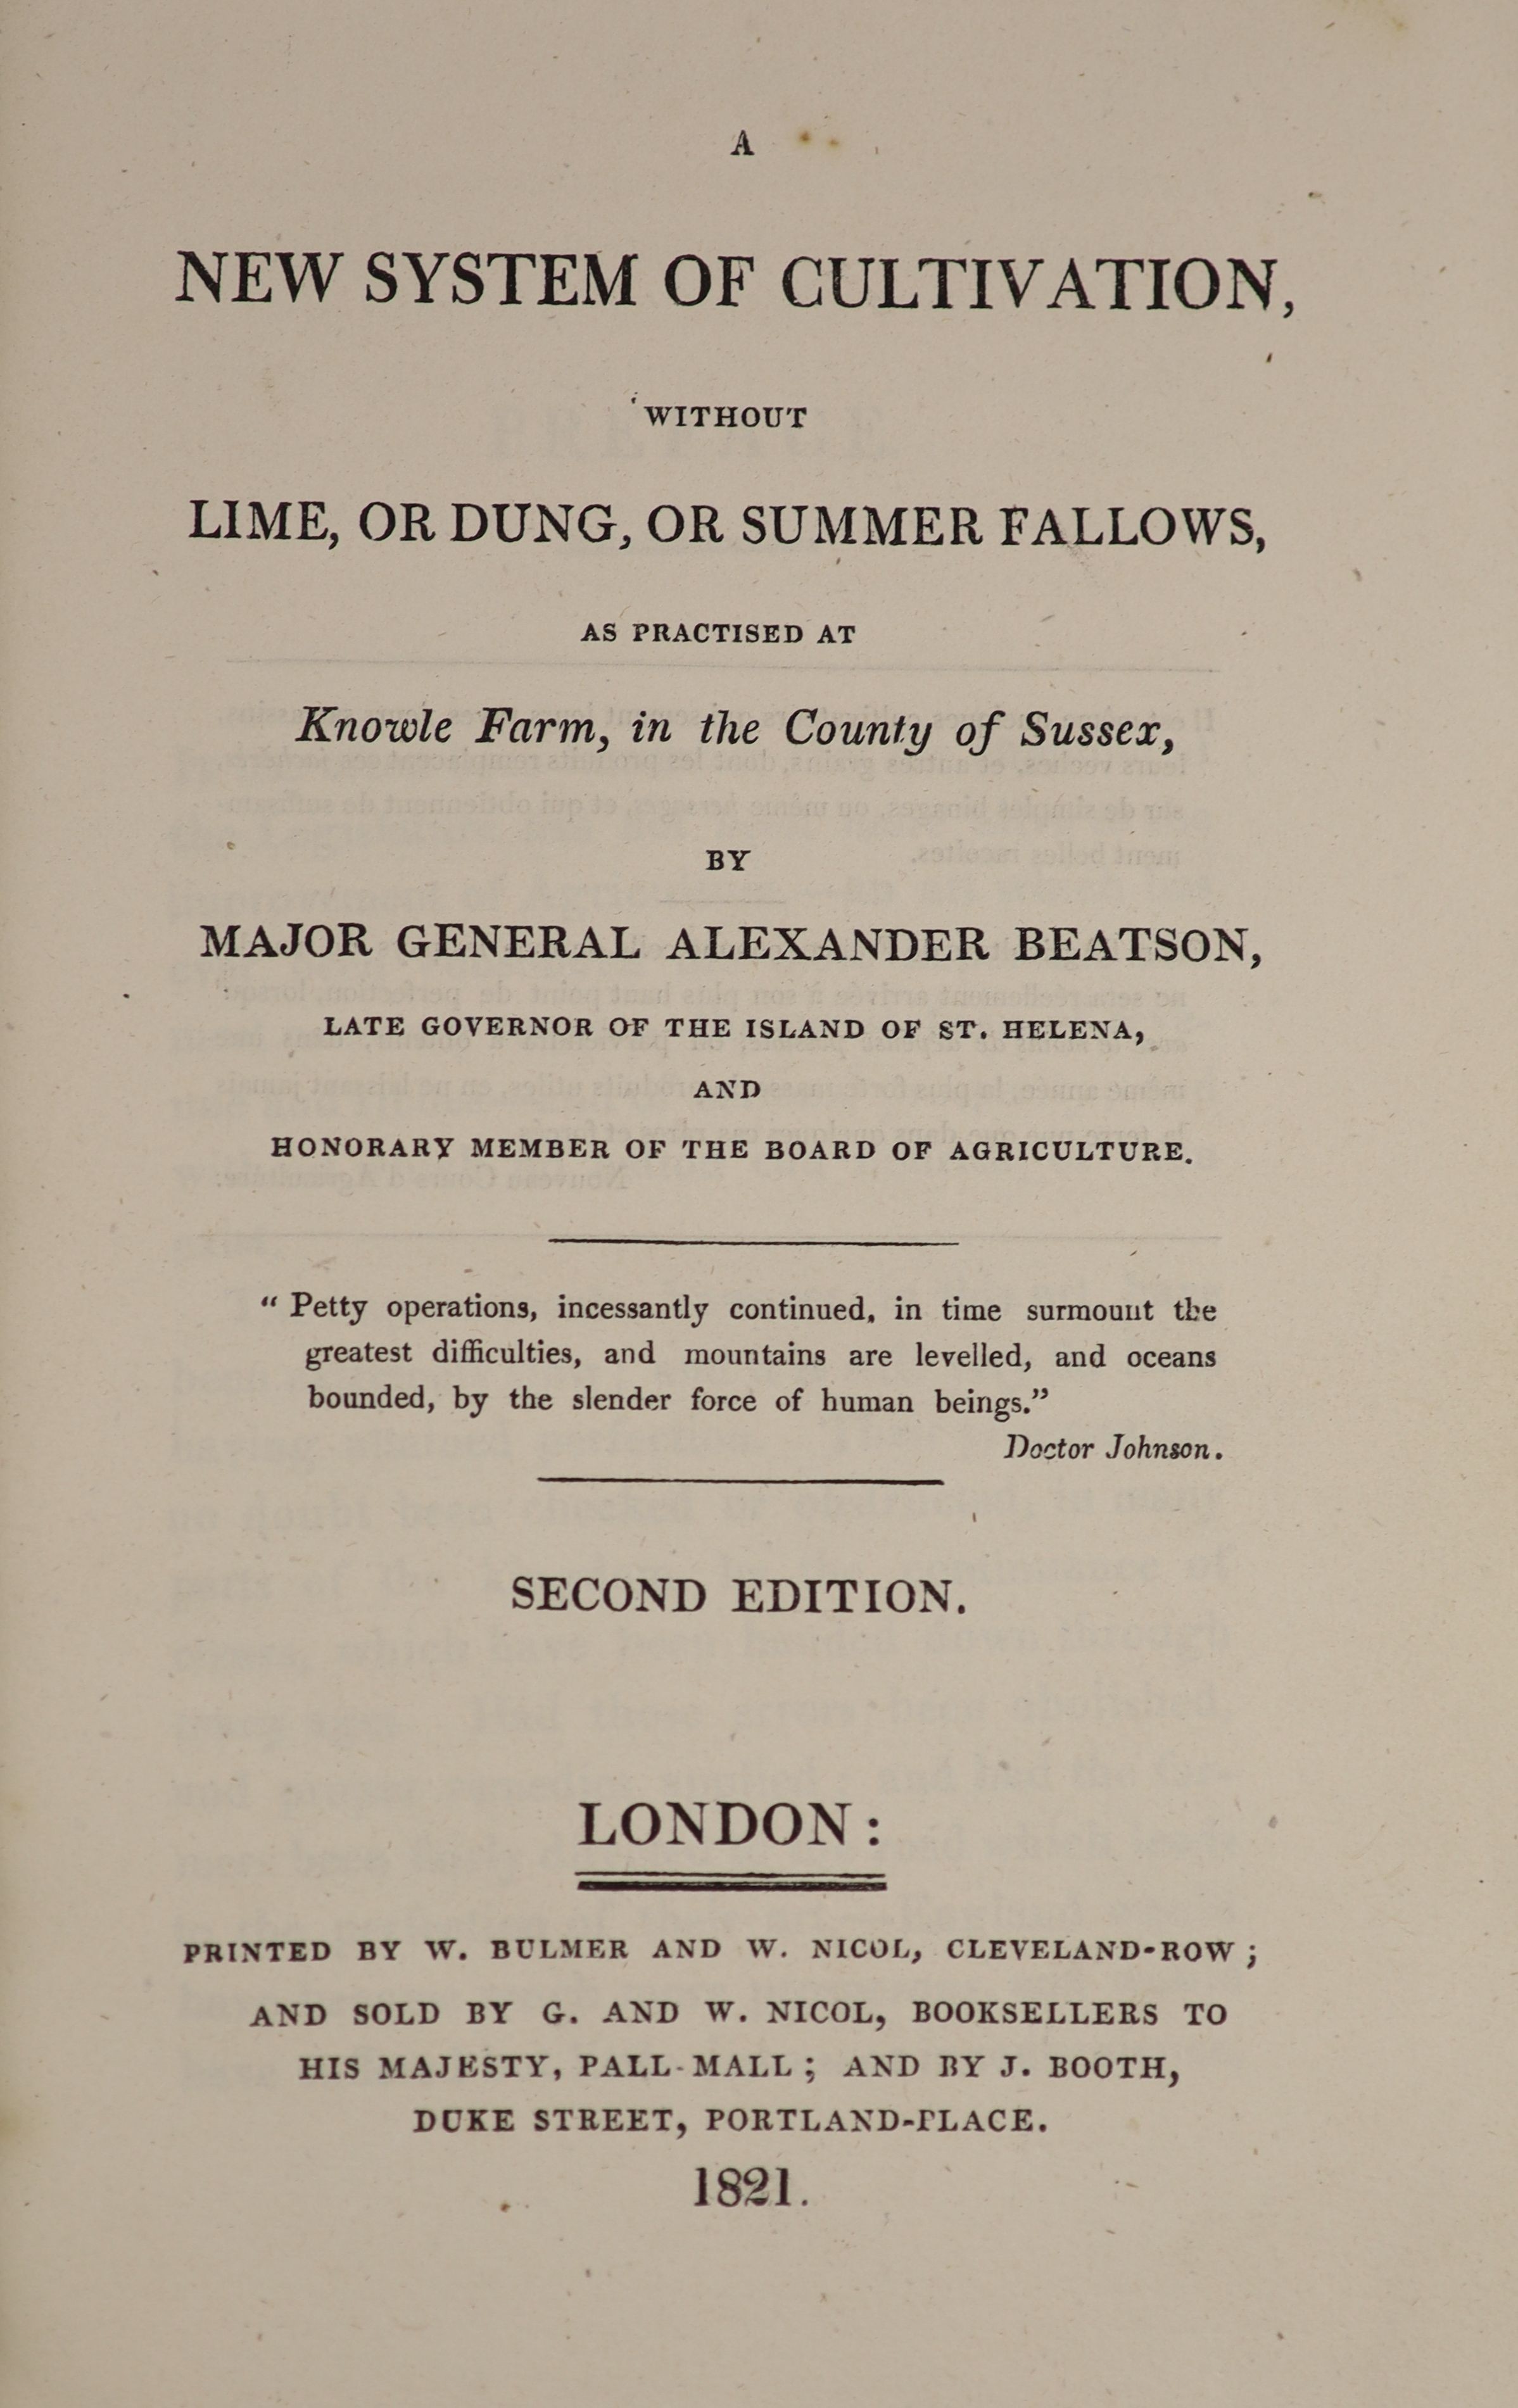 Gilpin, William - Remarks on Forest Scenery and other Woodland Views, 2 vols, 8vo, quarter bound stiff paper boards, Fraser & Co., Edinburgh, 1834 and Beatson, Major General Alexander - A New System of Cultivation, 2nd e